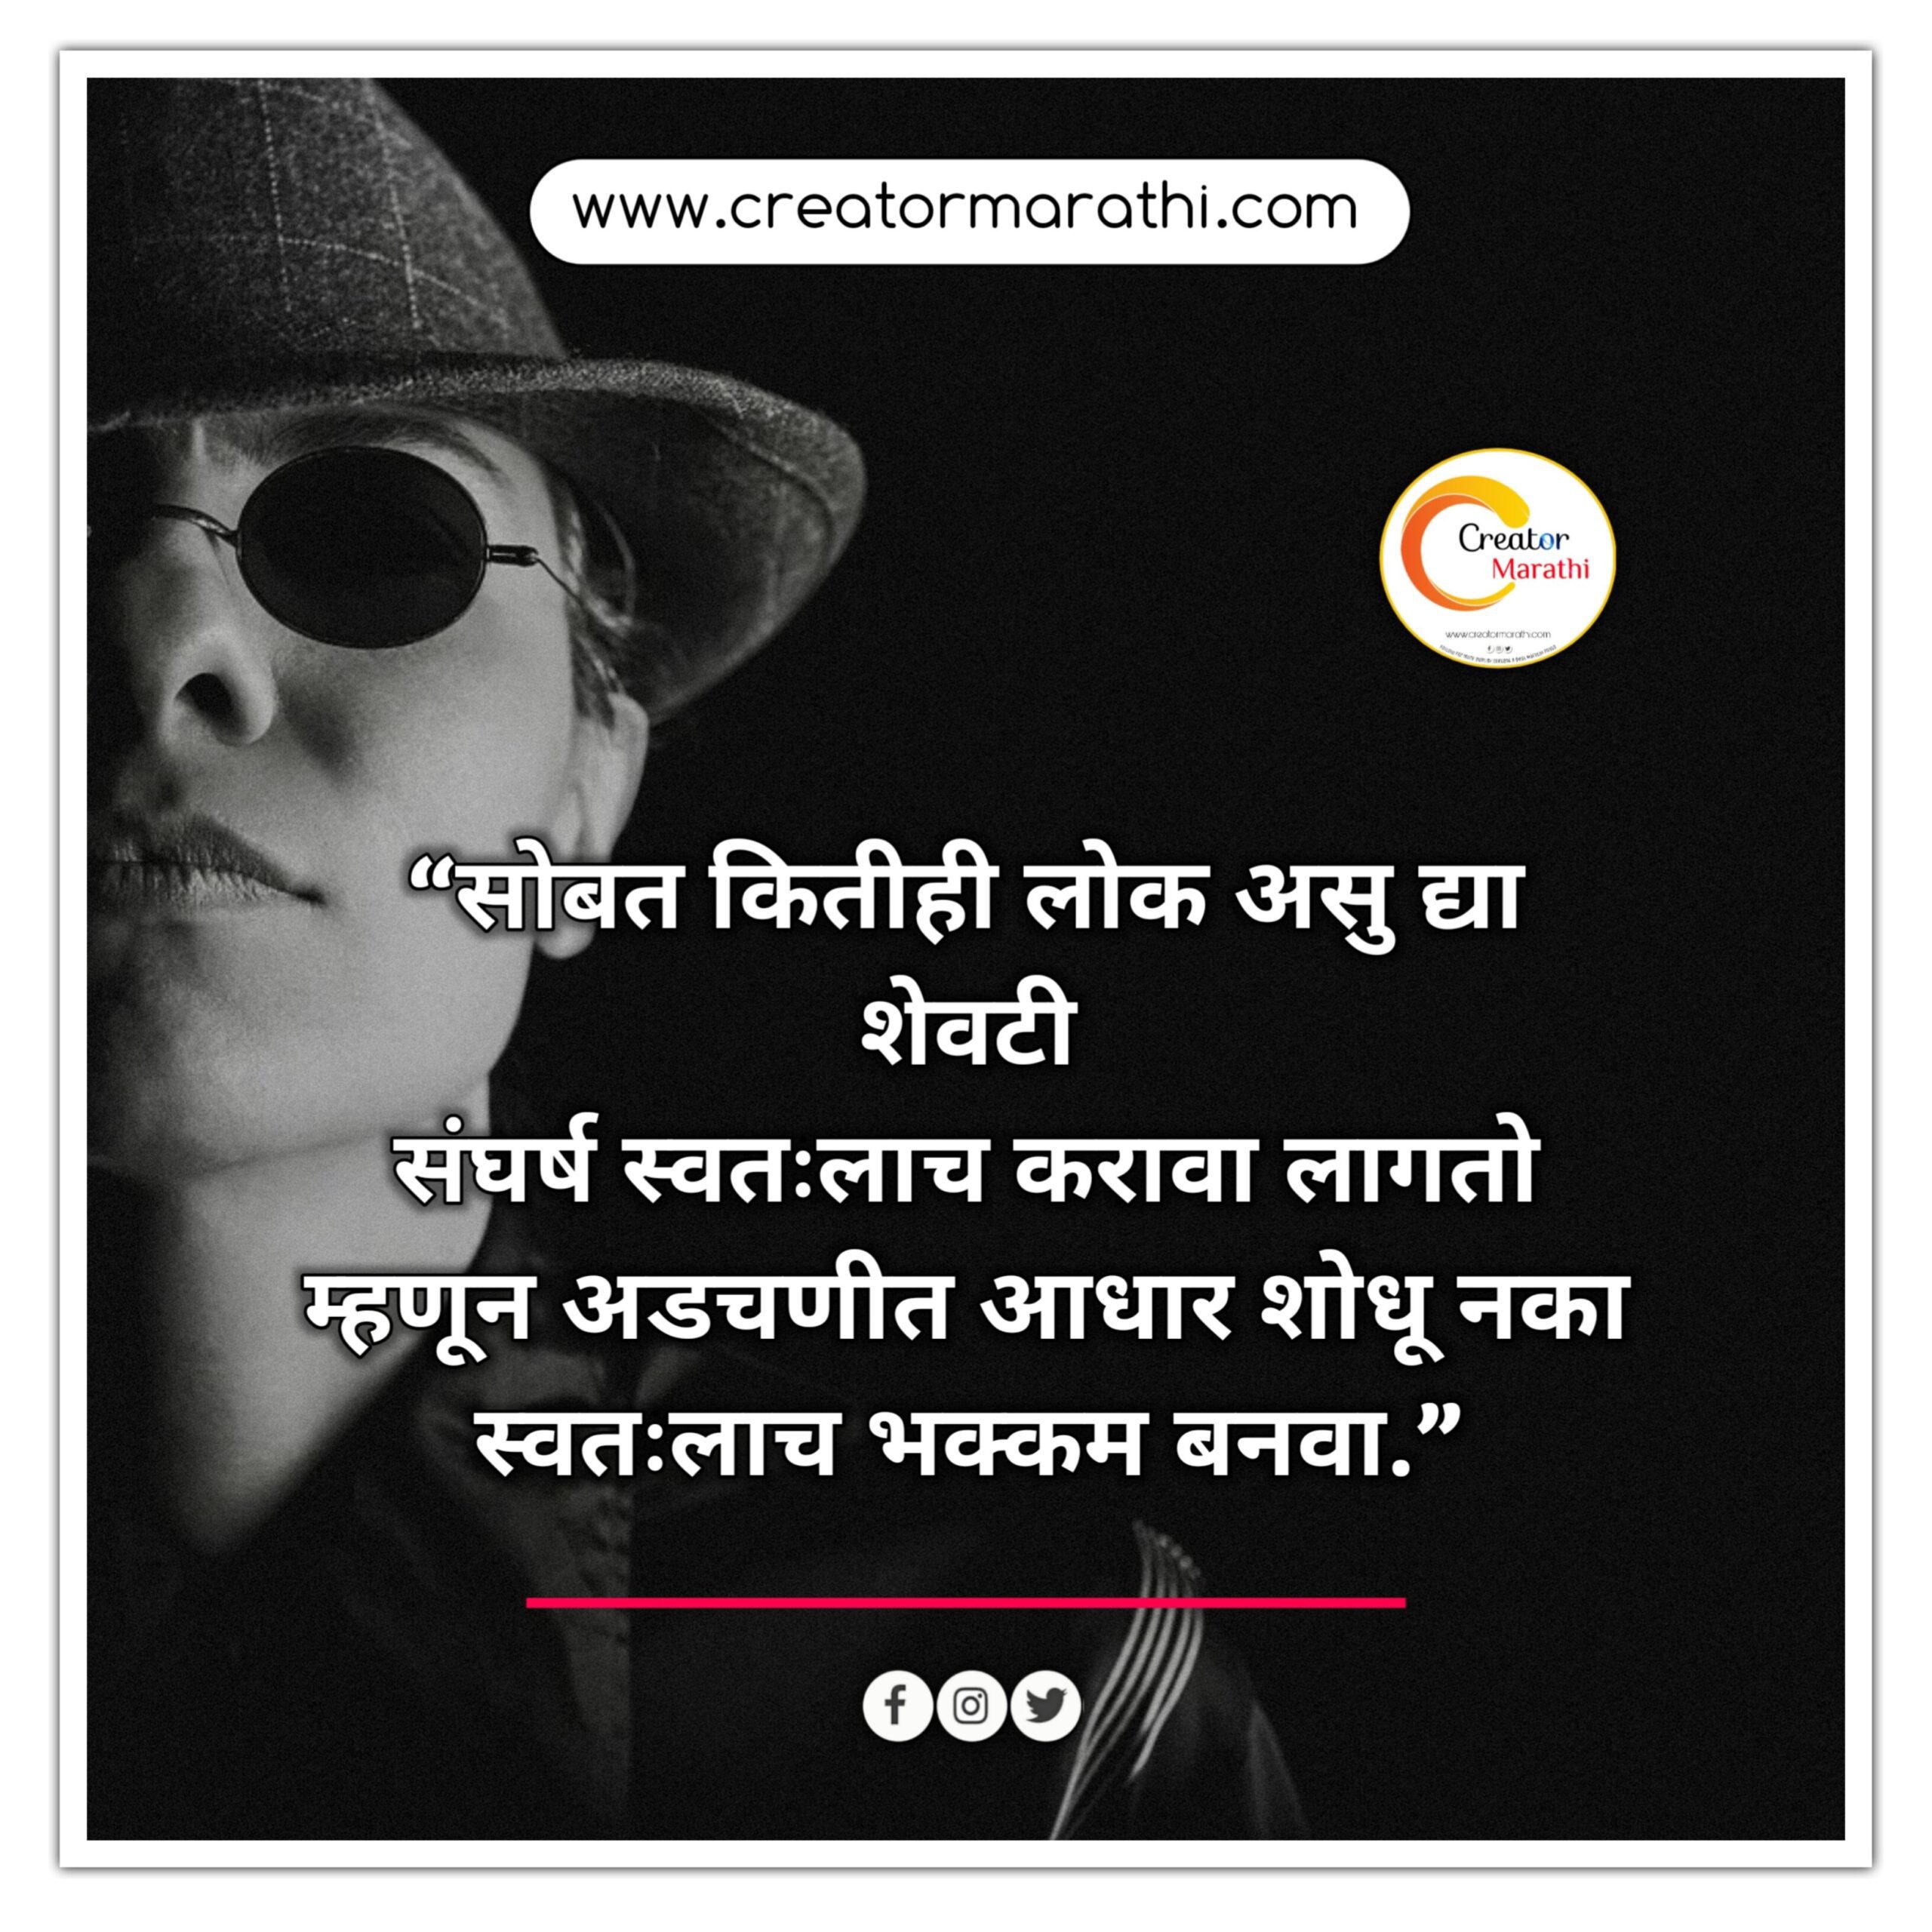 Sharechat inspirational quotes in marathi